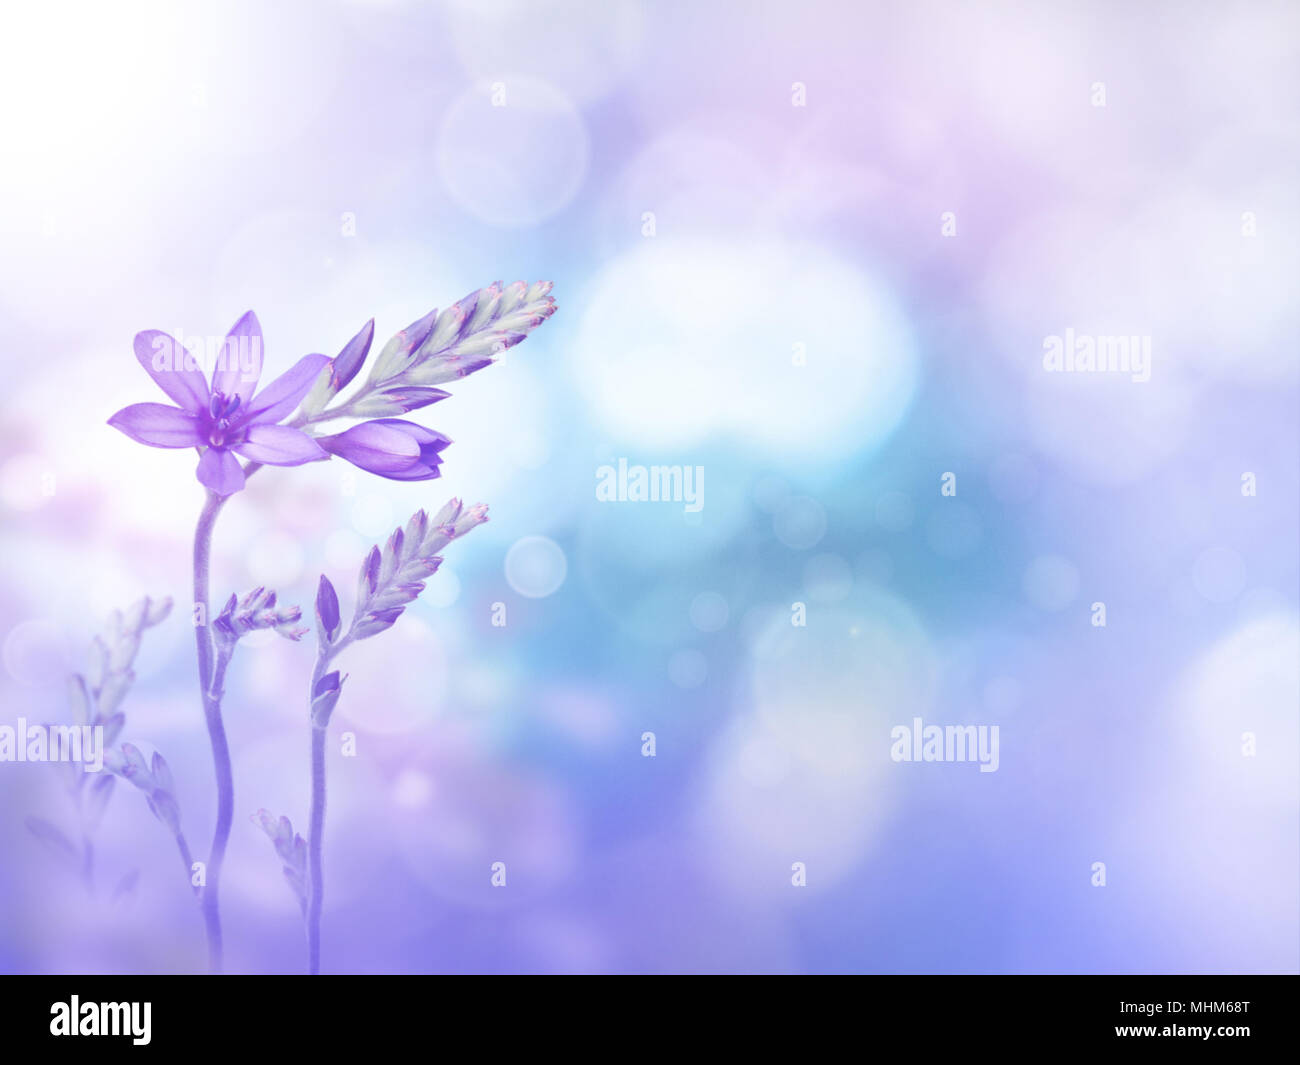 Light purple freesia flowers and buds on the violet turquoise blurred background. Floral desktop. Toned image. Stock Photo